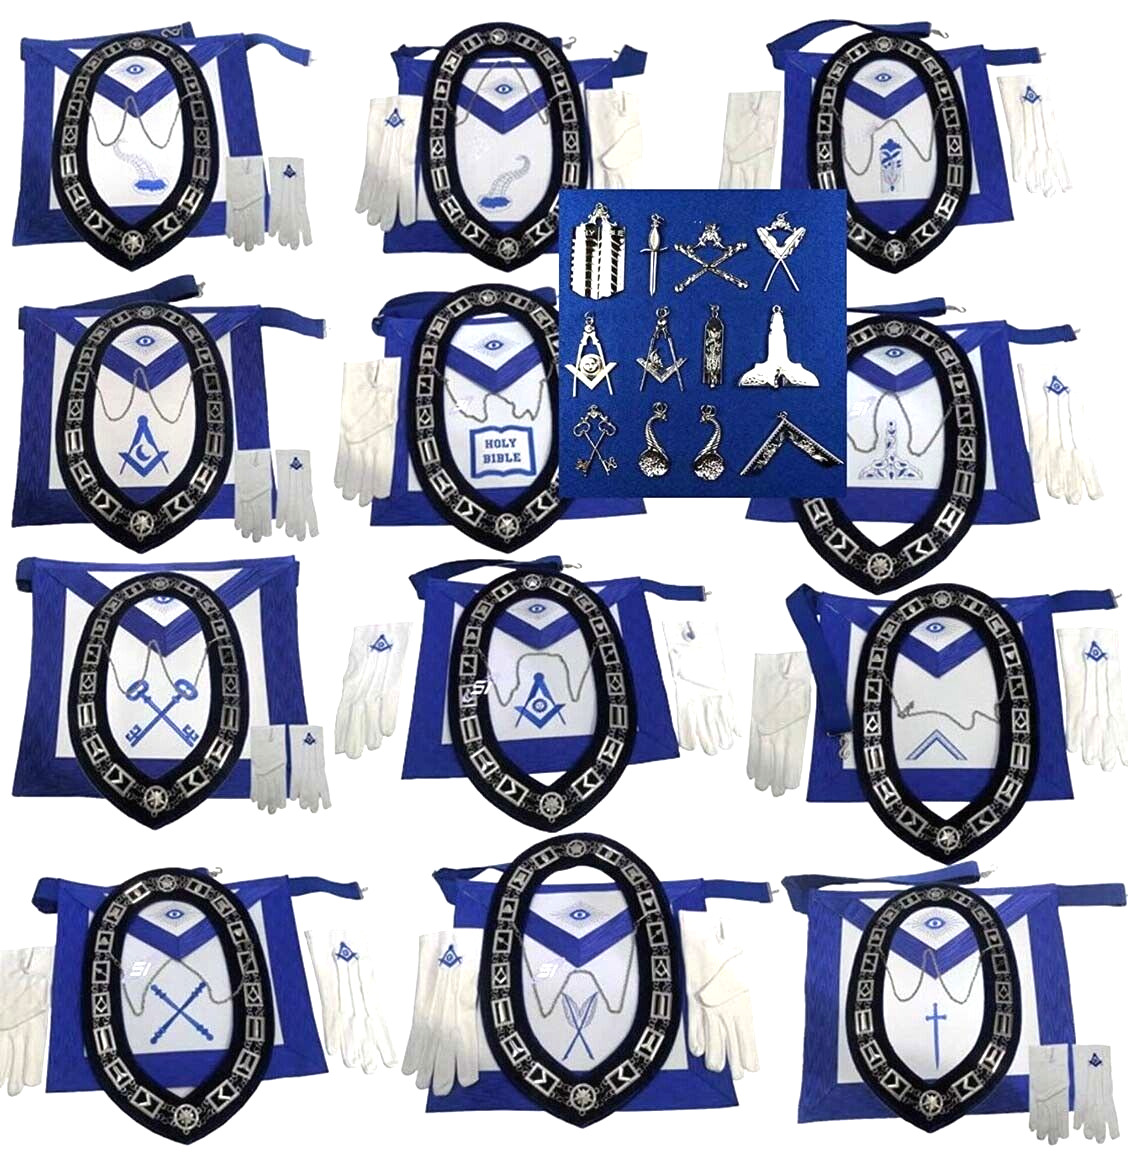 Masonic Blue Lodge Officer Aprons, Chain Collar with jewel,Glove Set Pack  of 12